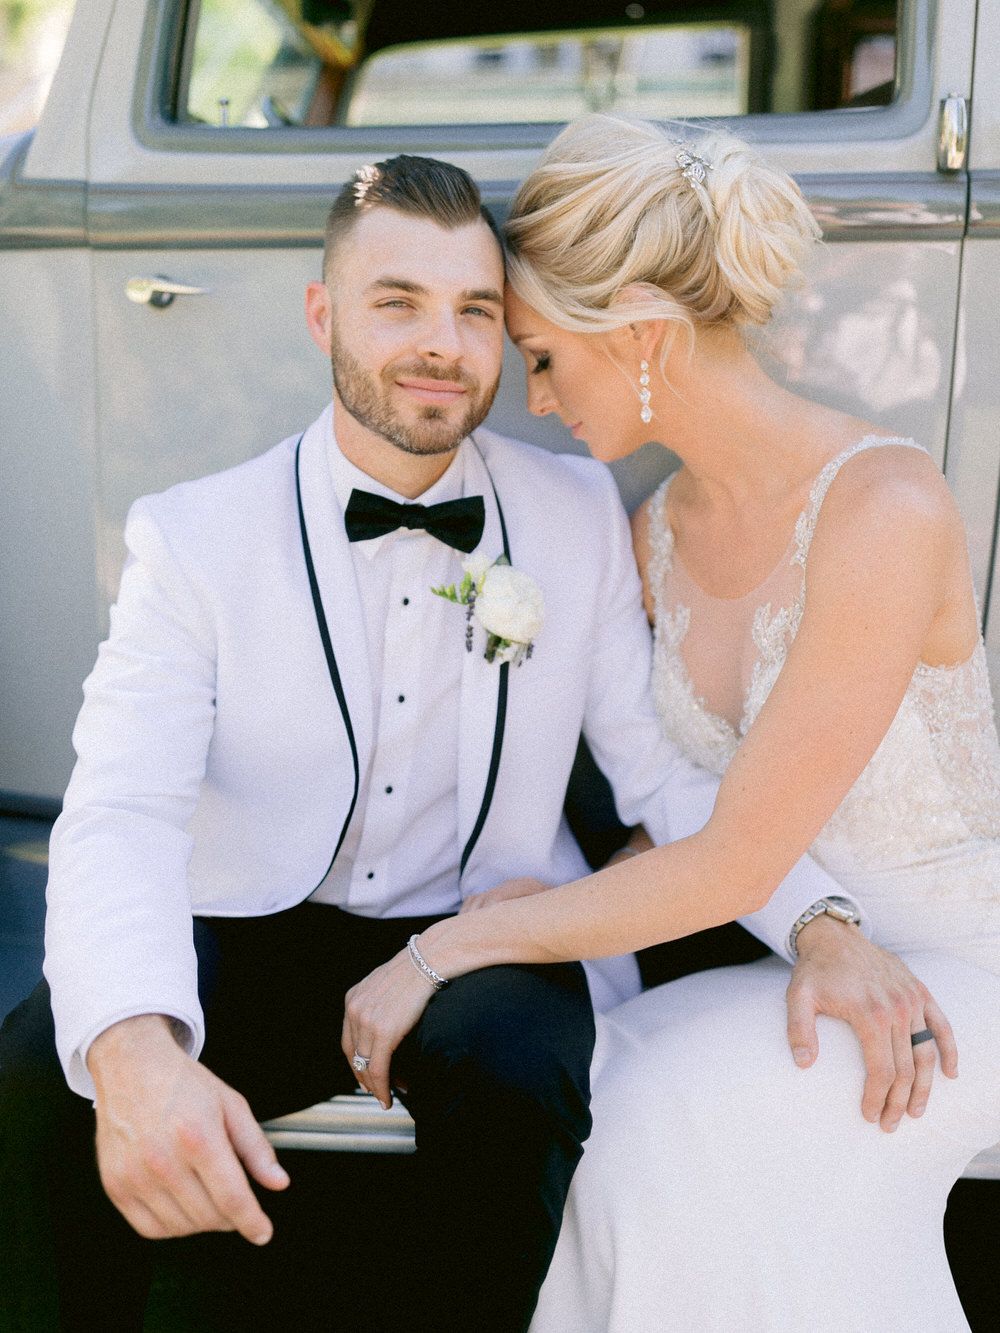 This Iconic Black and White Wedding Will Have You Saying YES To Classic  Details!